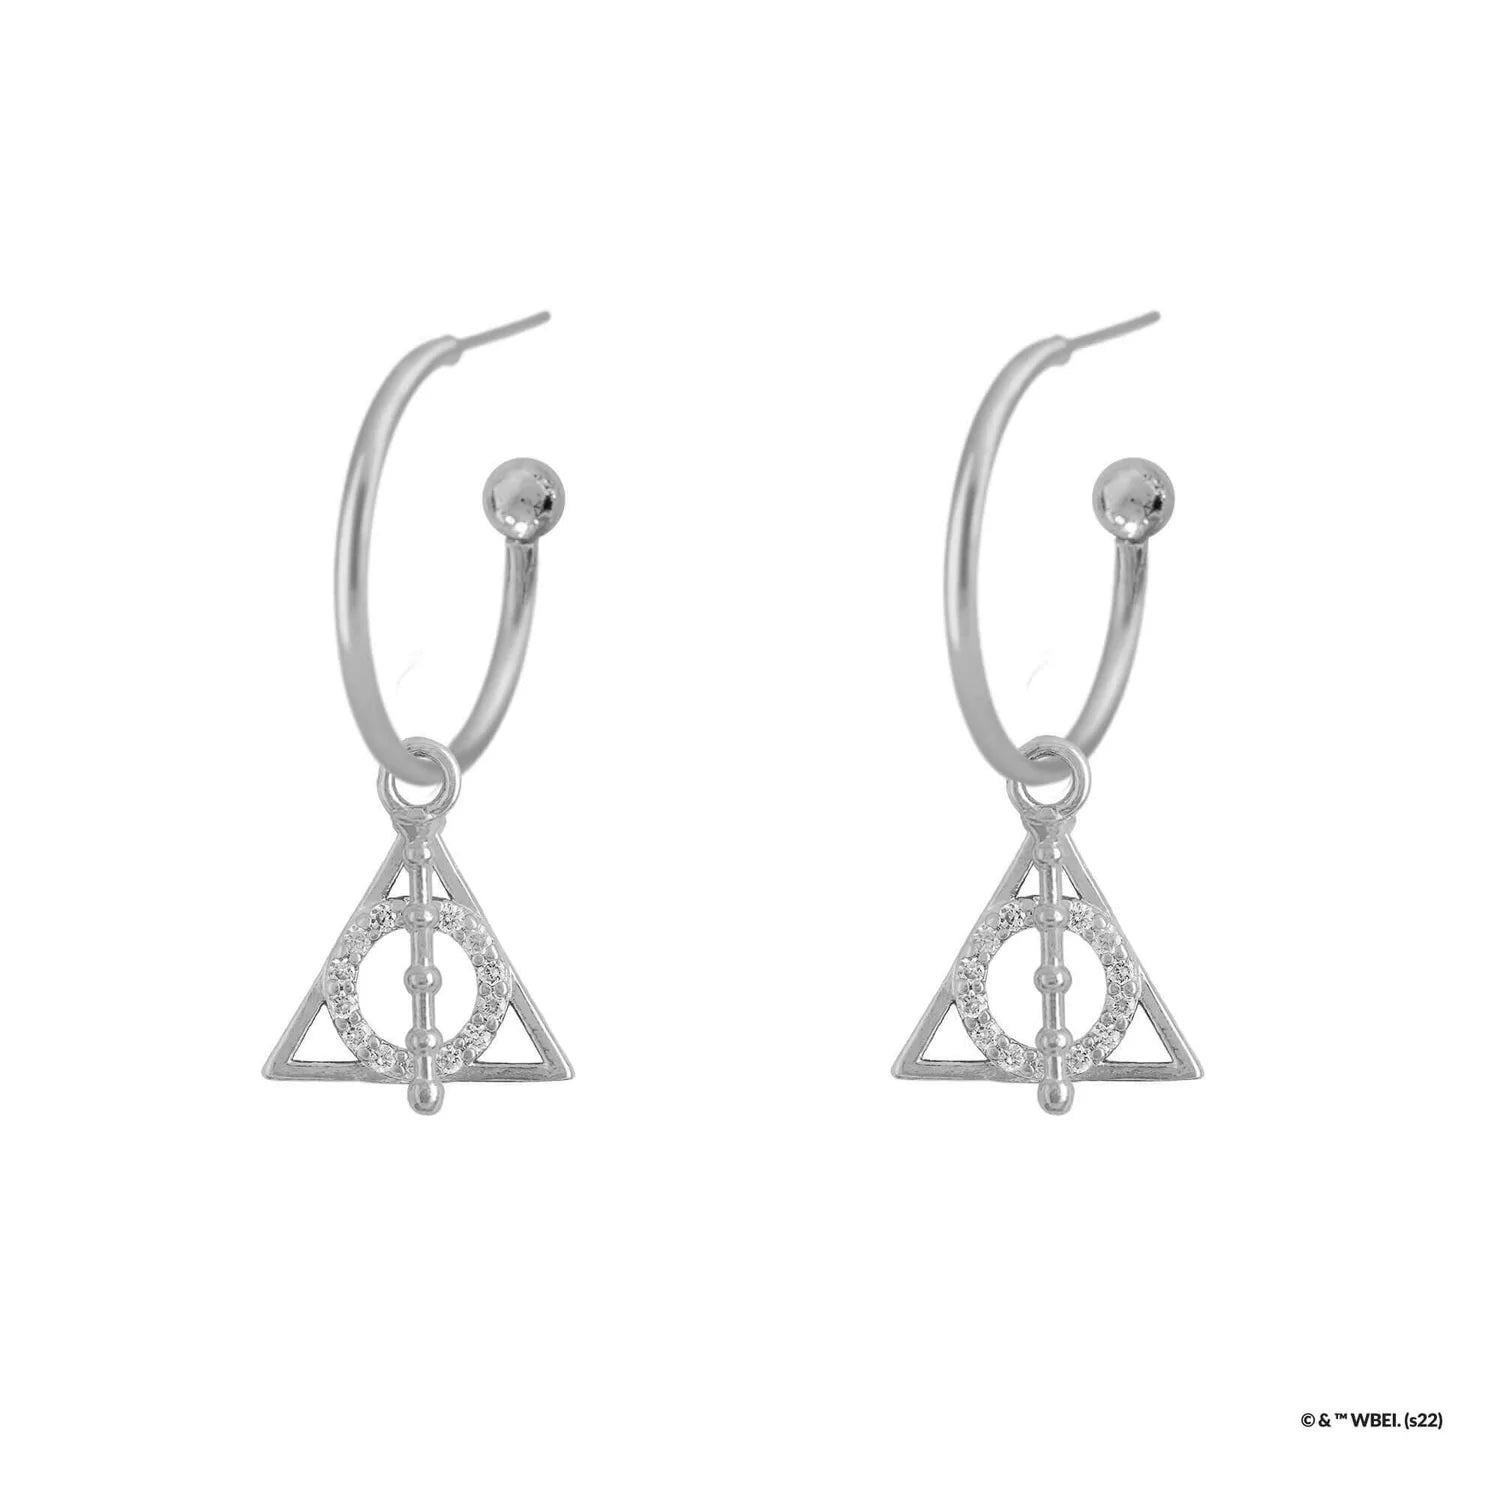 Short Story - Harry Potter Hoop Earring Diamante Deathly Hallows Silver